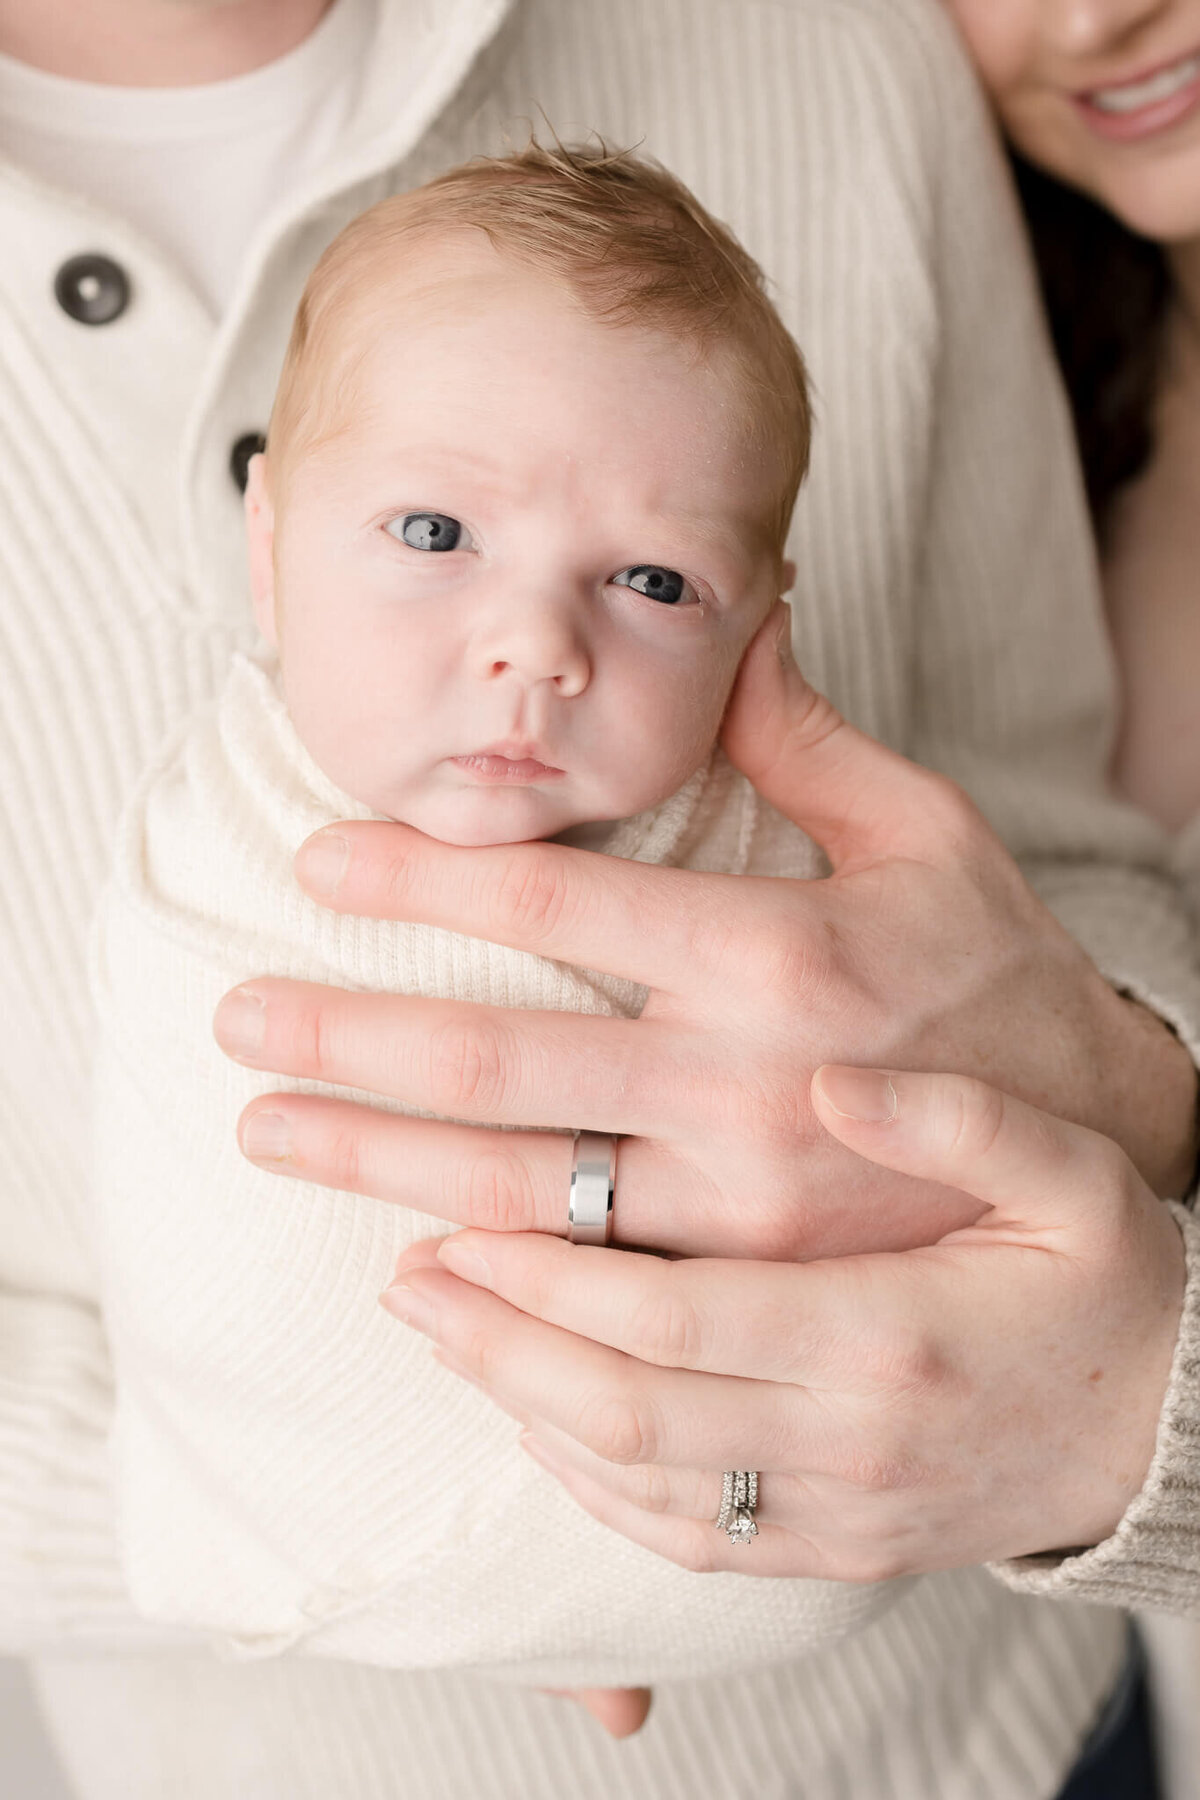 baby boy looking at camera in photo session with parent's hands holding him with their wedding rings showing